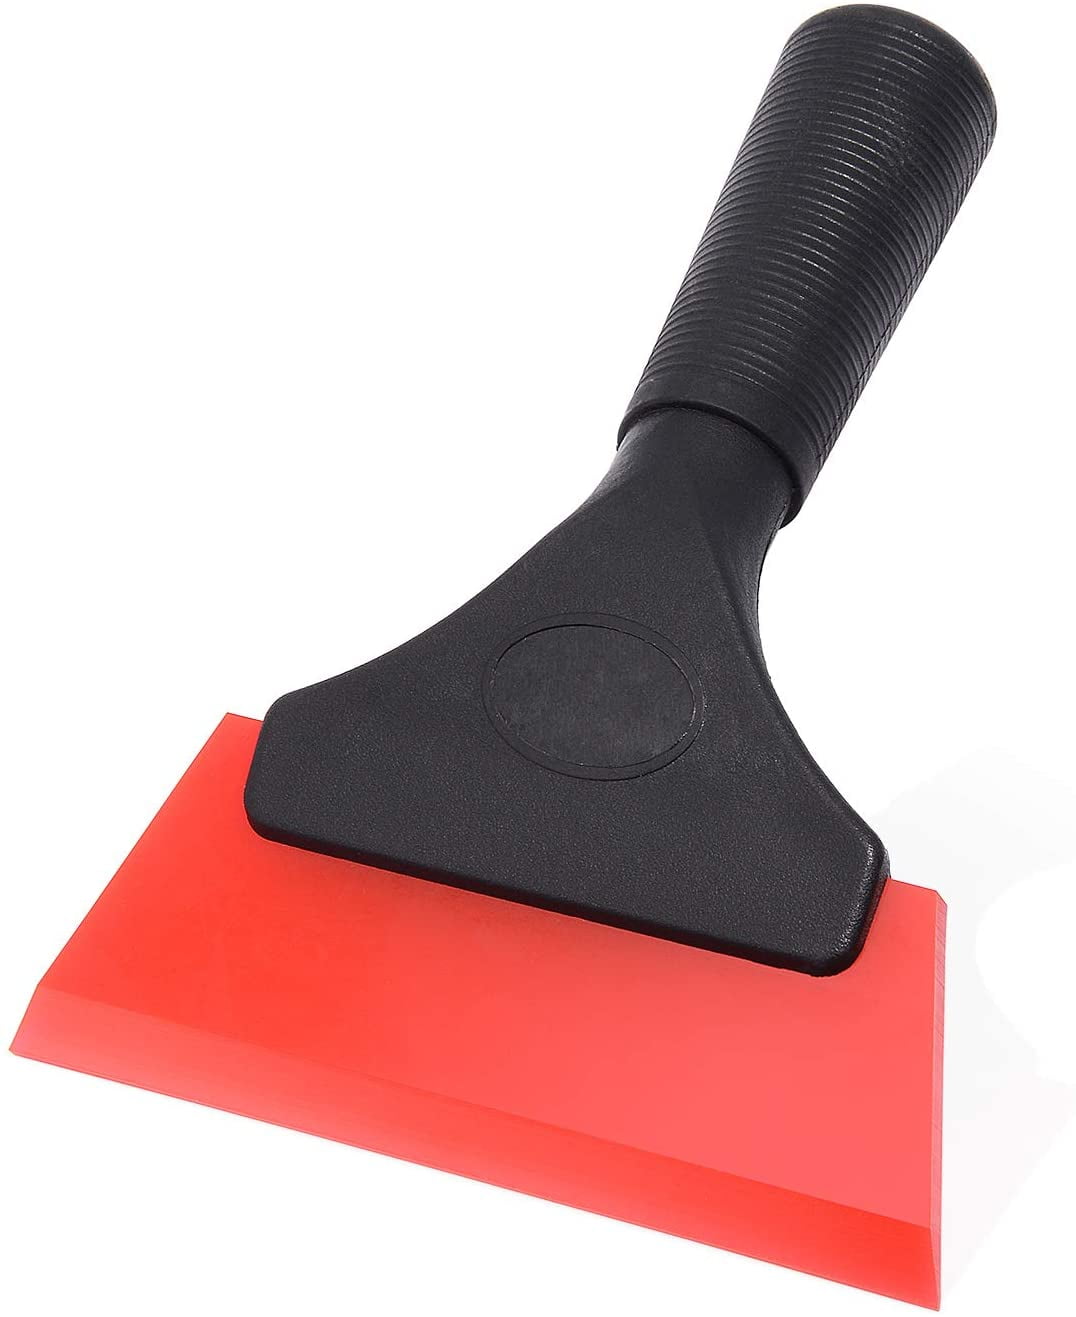 amousa Small Squeegee With 5 Inch Rubber Mini Wiper Window Tinting